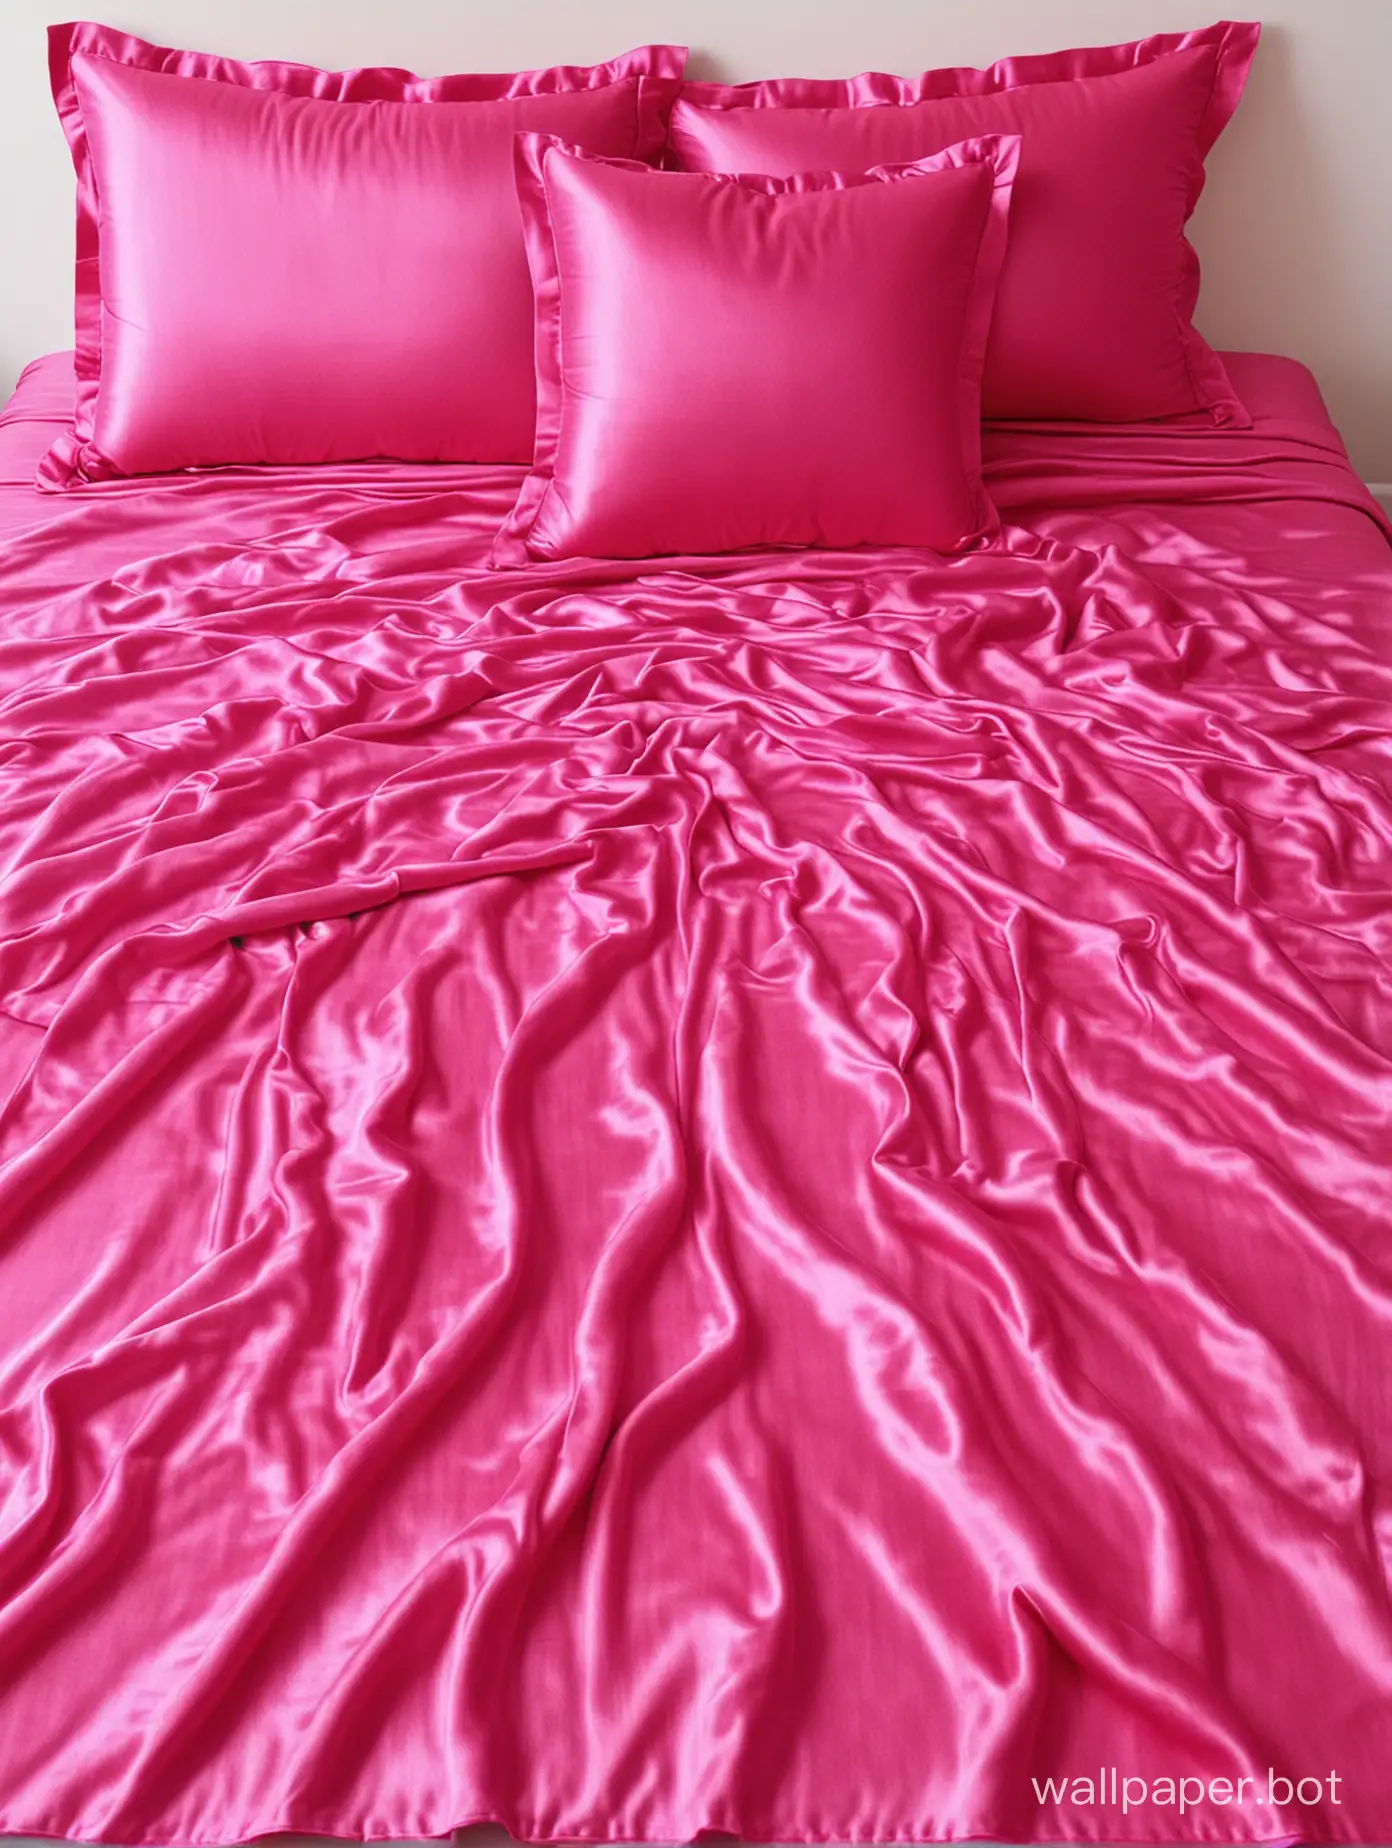 Hot pink silk blanket and pillow fetish